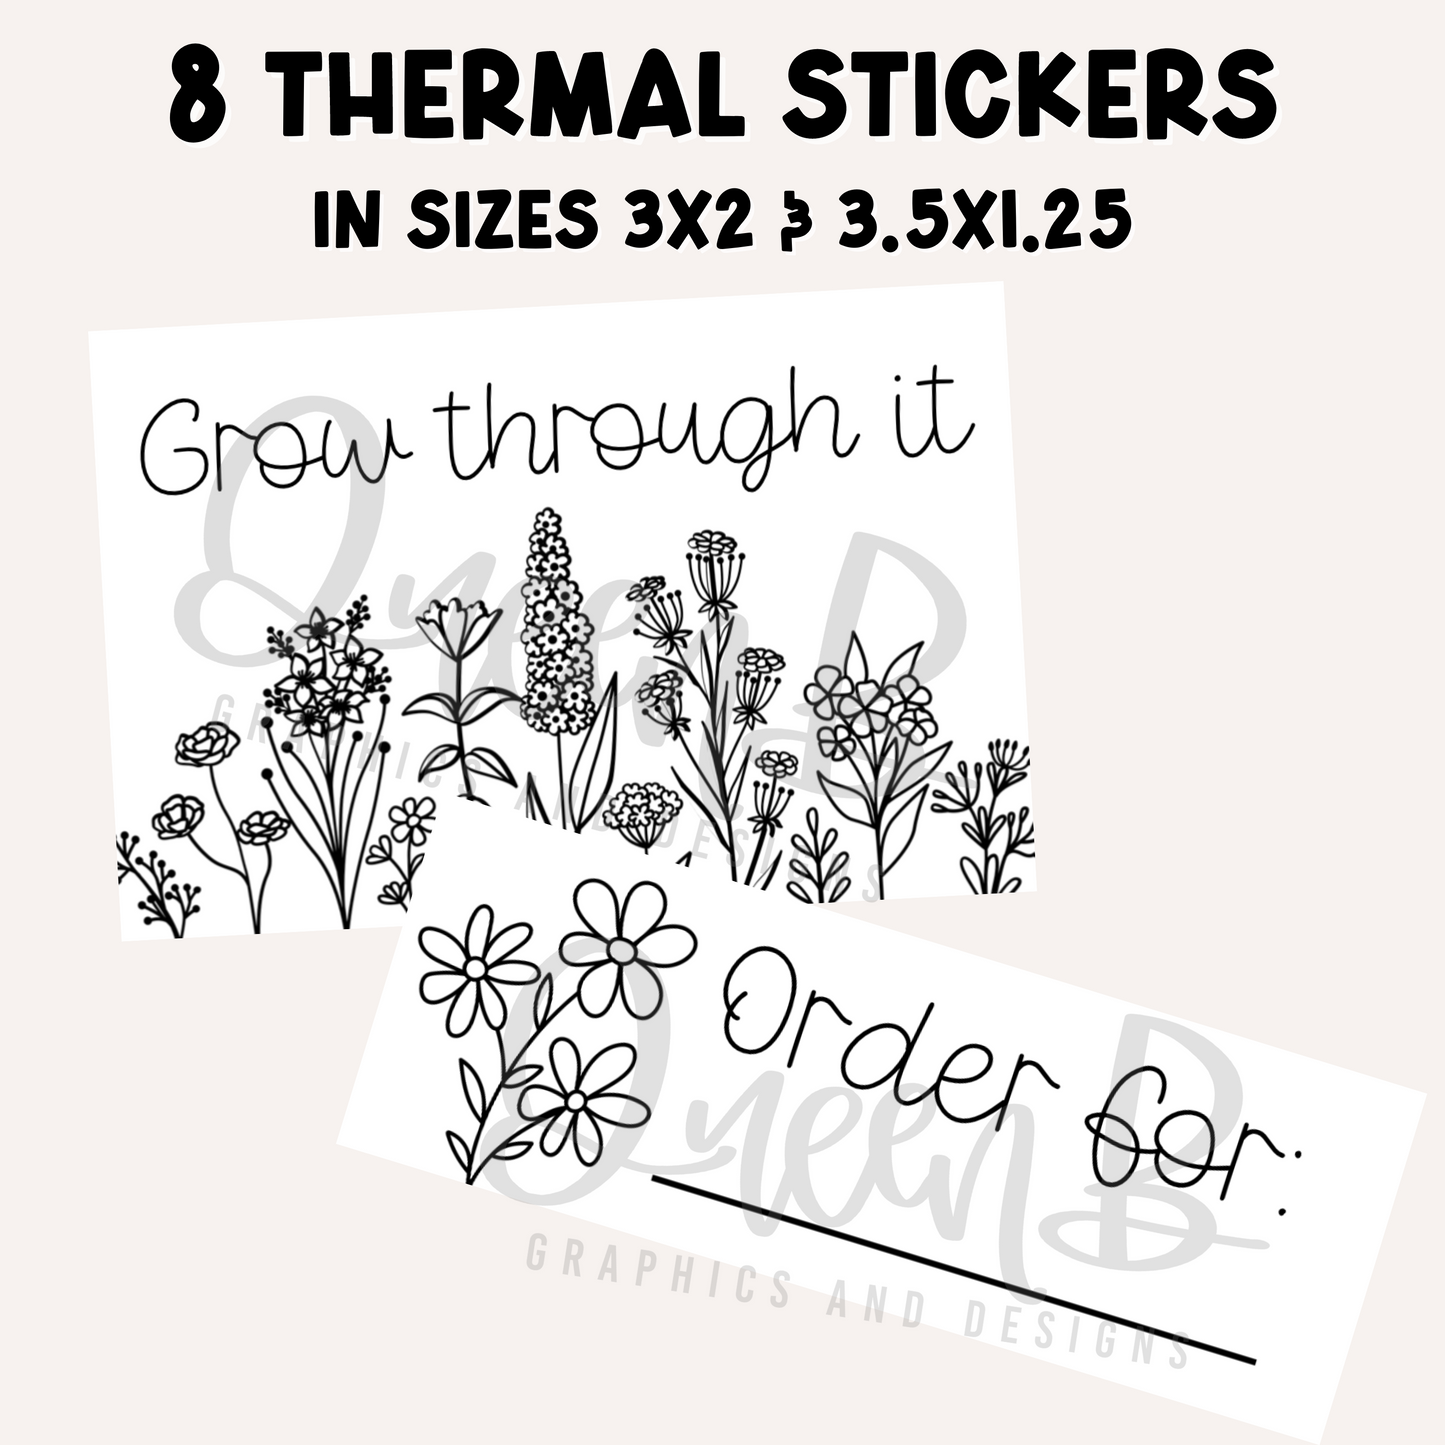 Grow Through It Mega Party Kit Graphics Collection